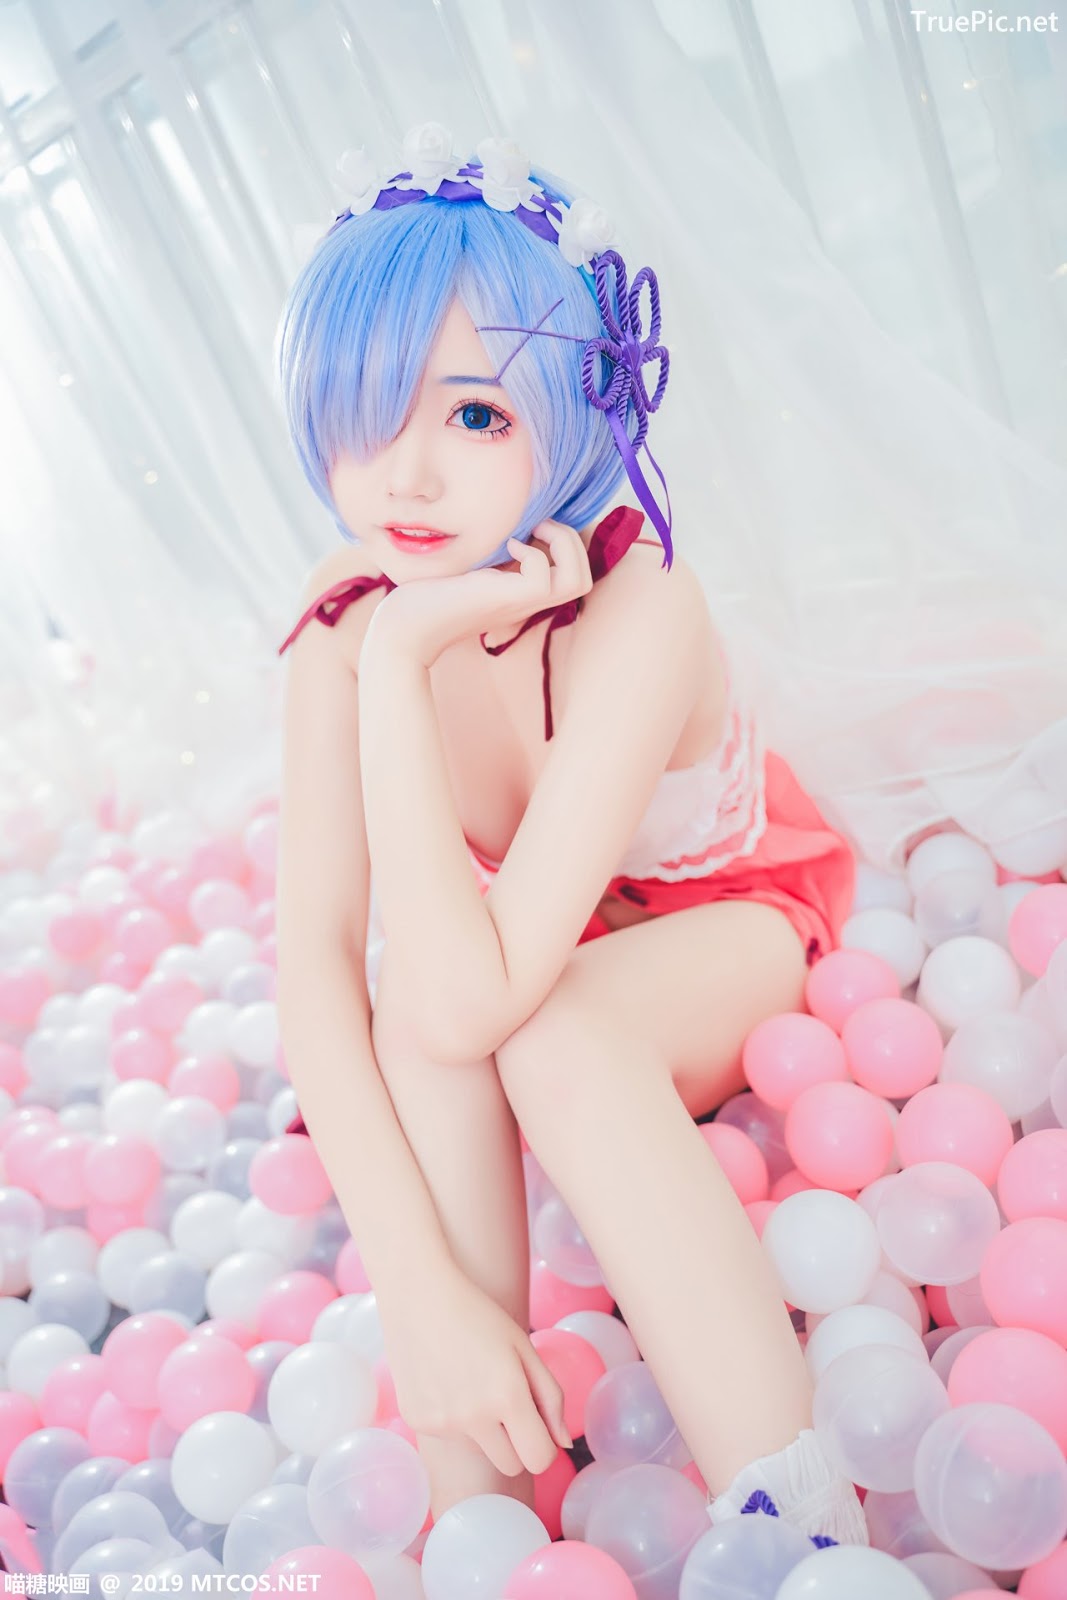 Image [MTCos] 喵糖映画 Vol.018 – Chinese Cute Model – Beautiful Rem Cosplay - TruePic.net - Picture-27